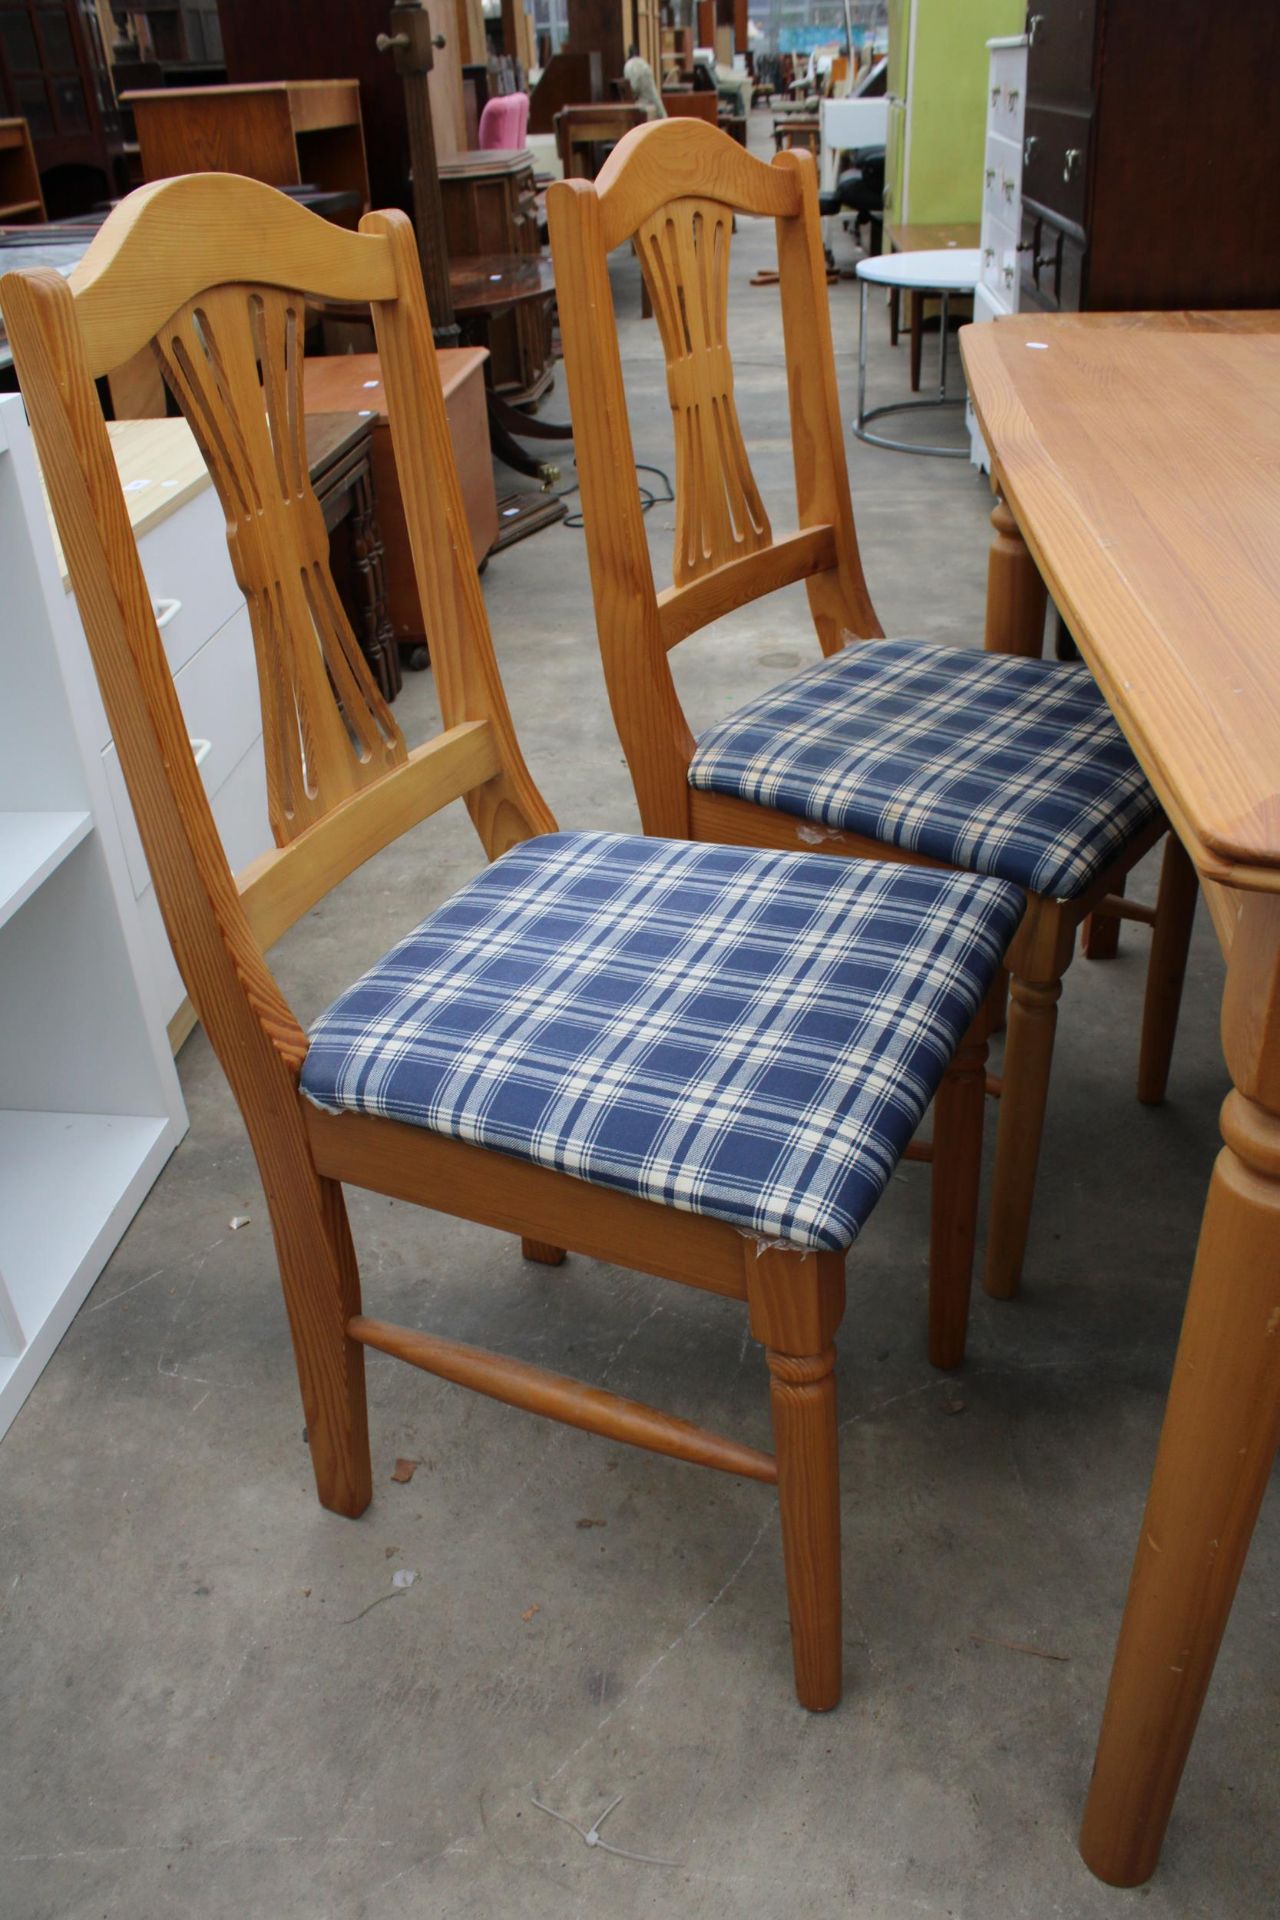 A PINE DINING TABLE 45" X 29" AND FOUR CHAIRS - Image 3 of 4